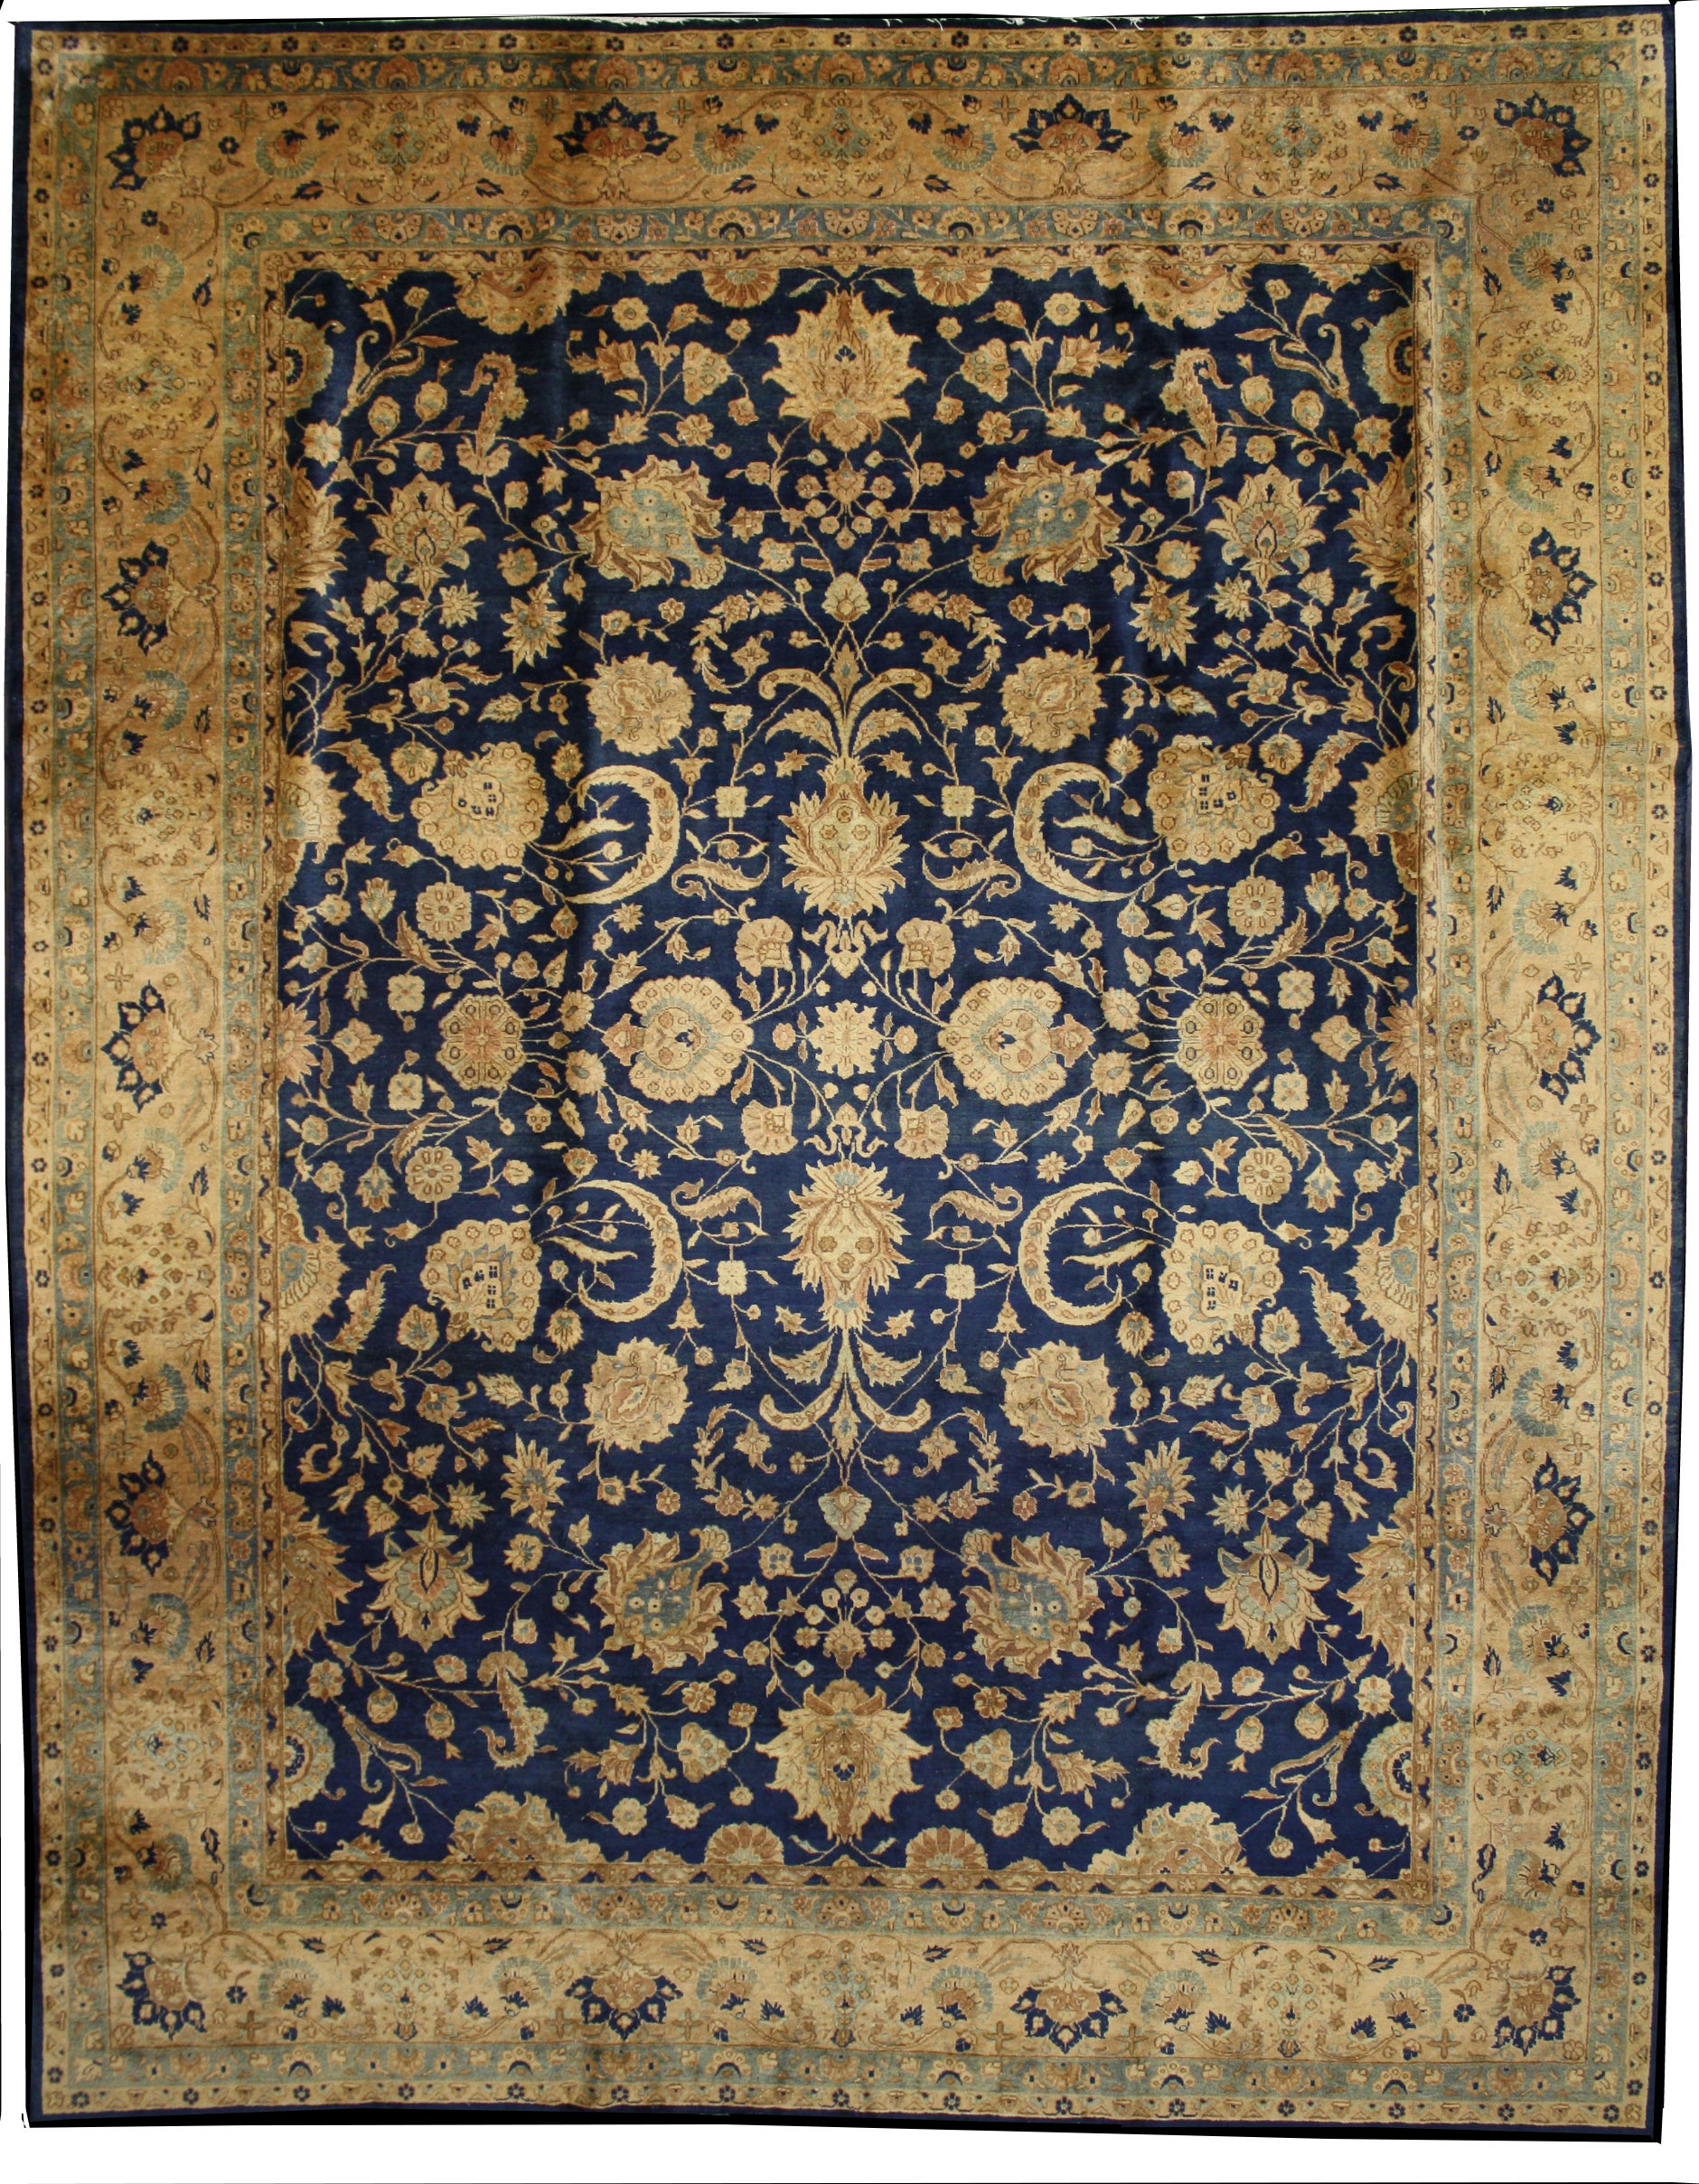 Antique Indian Agra Rug with Hollywood Regency Style